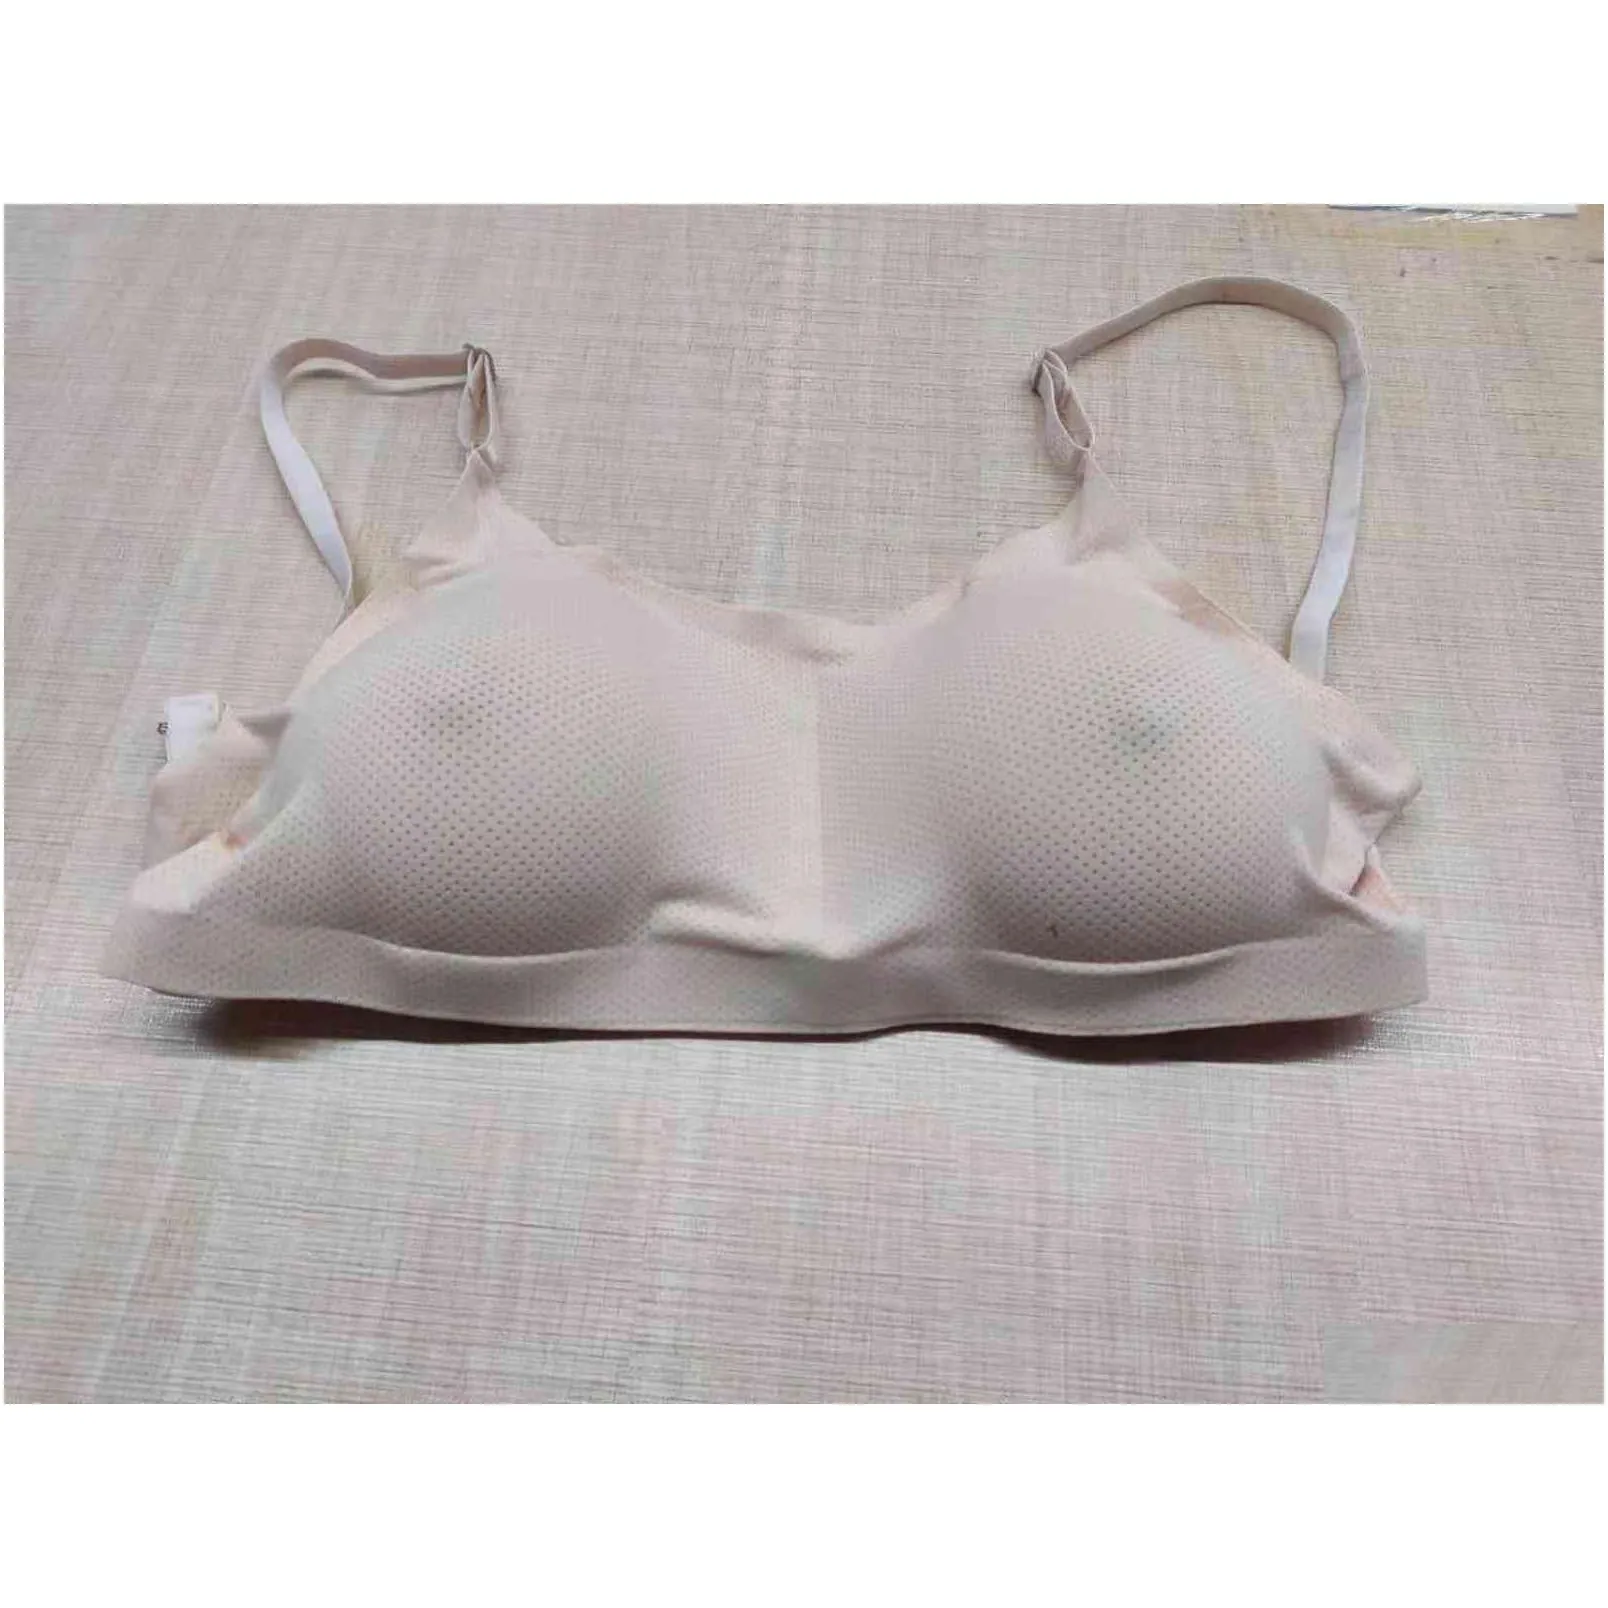 ae cup water drop false breast with underwear set cd cross dressing silicon4944627